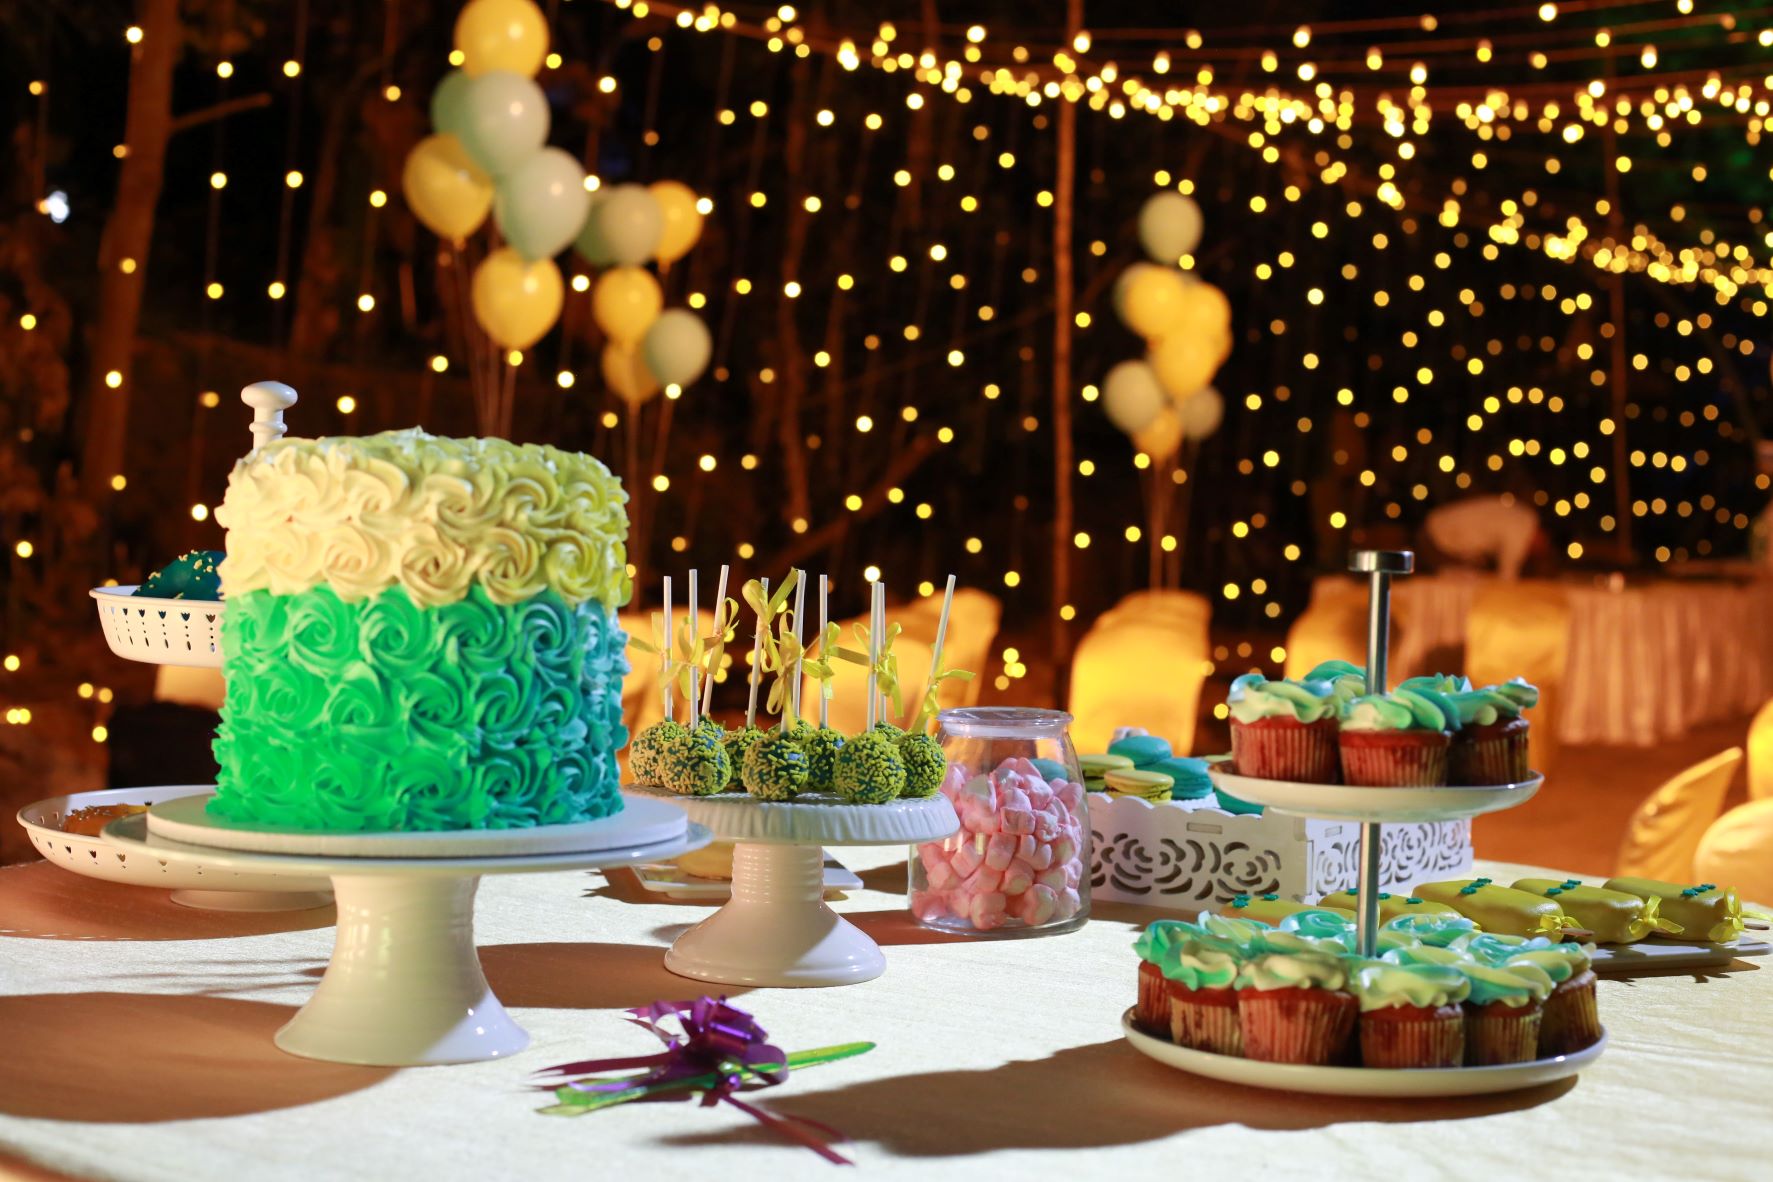 A dessert table with a cake and cupcakes